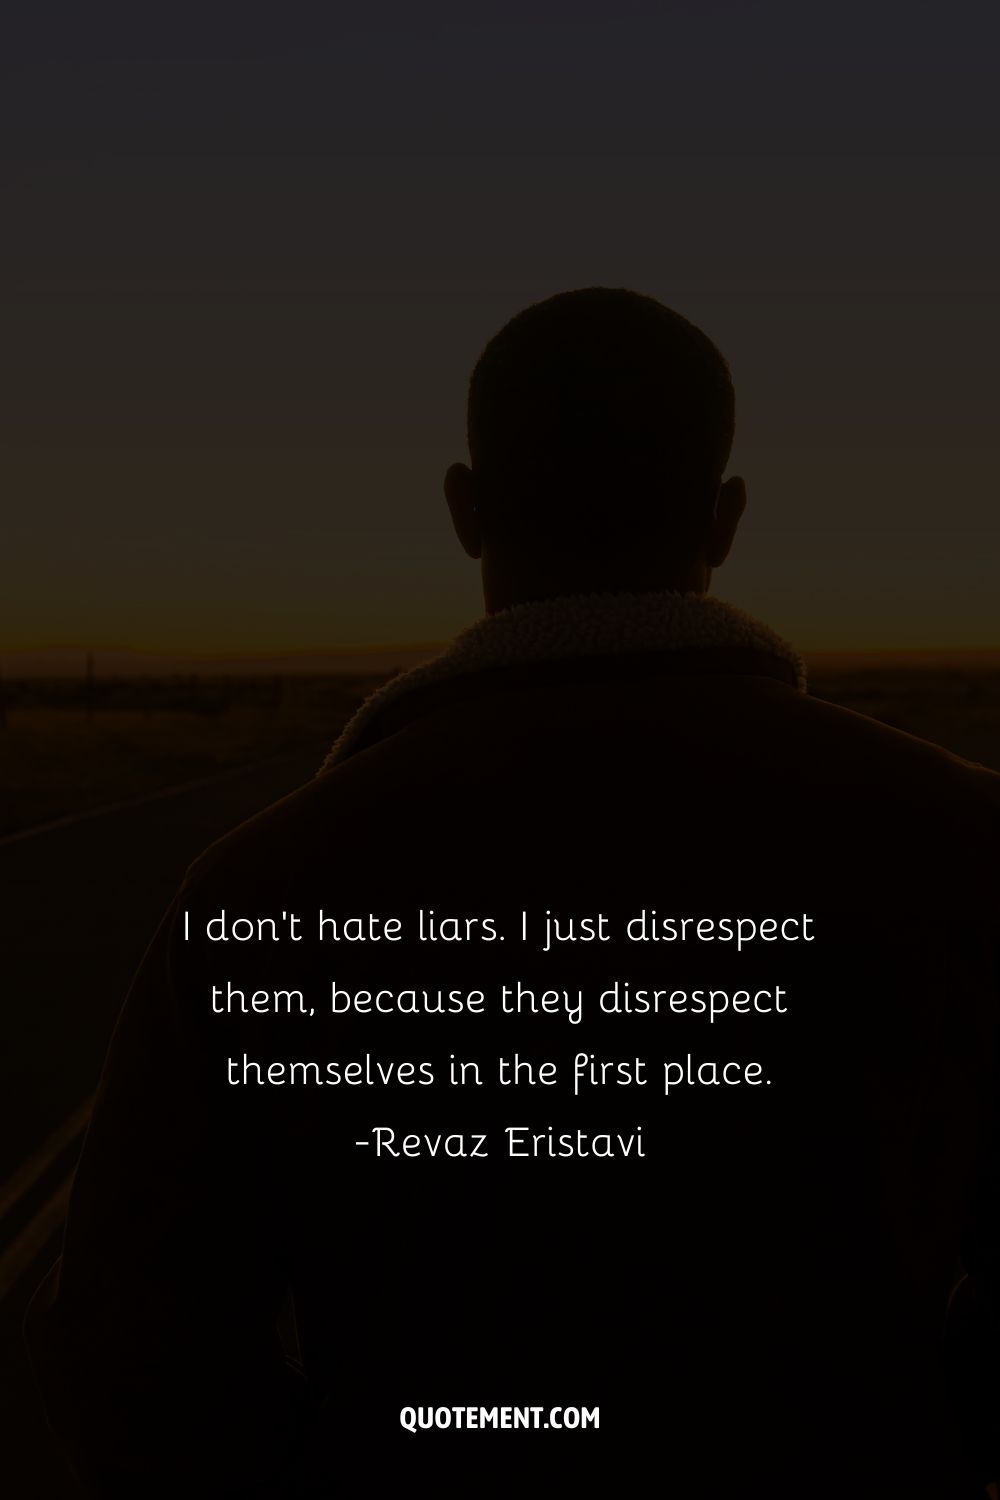 I don’t hate liars. I just disrespect them, because they disrespect themselves in the first place.